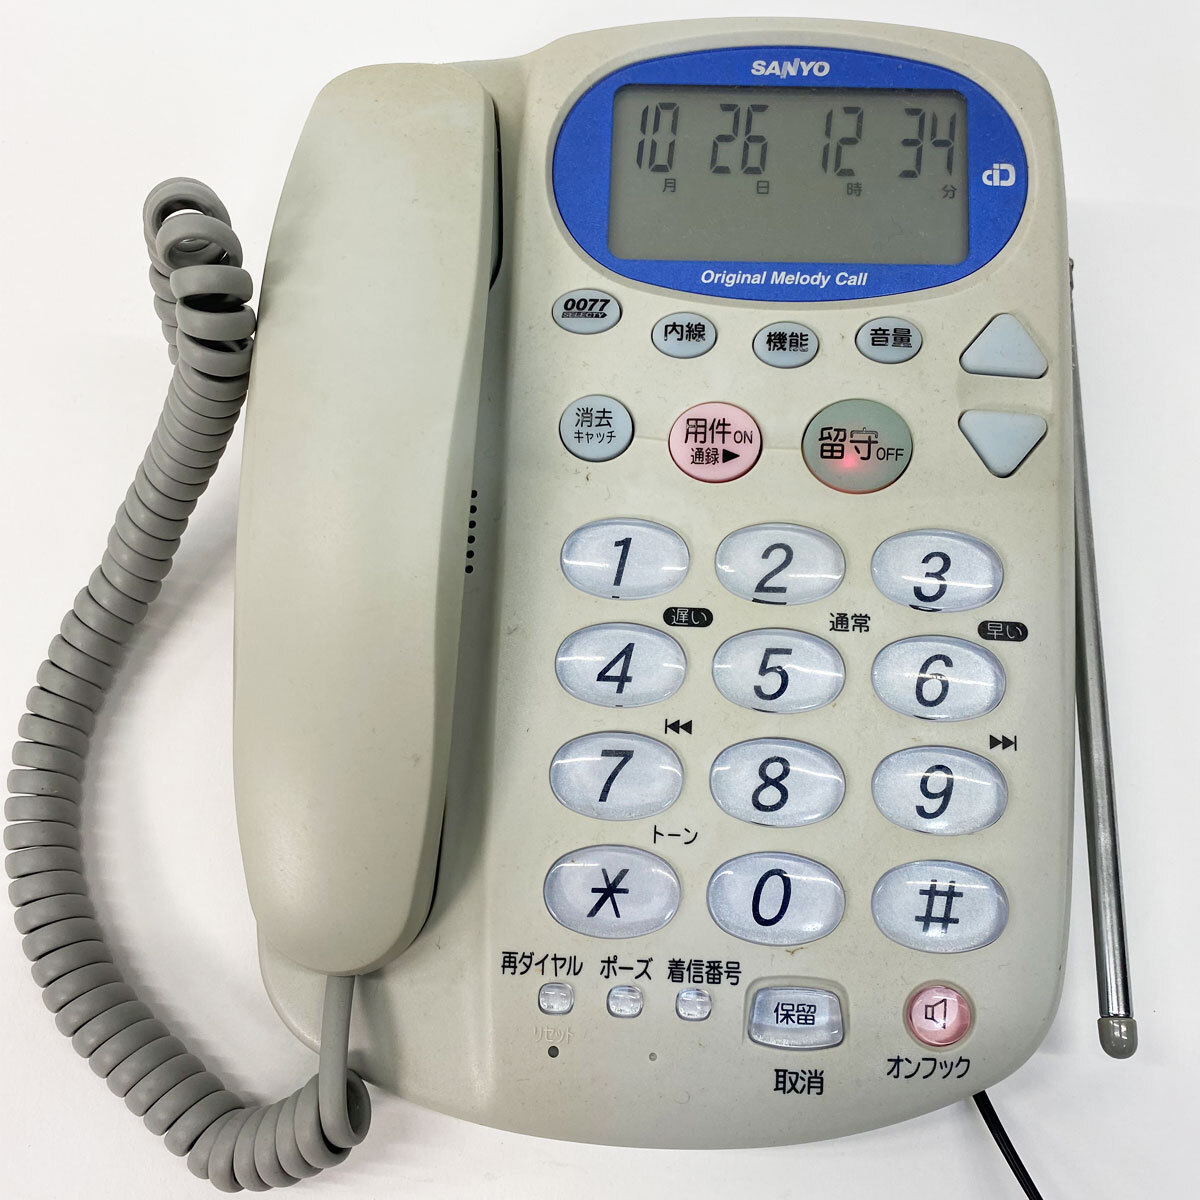  Sanyo SANYO cordless empty-handed code .. answer phone machine cordless handset electrification has confirmed TEL-B5(W) present condition goods secondhand goods nn0101